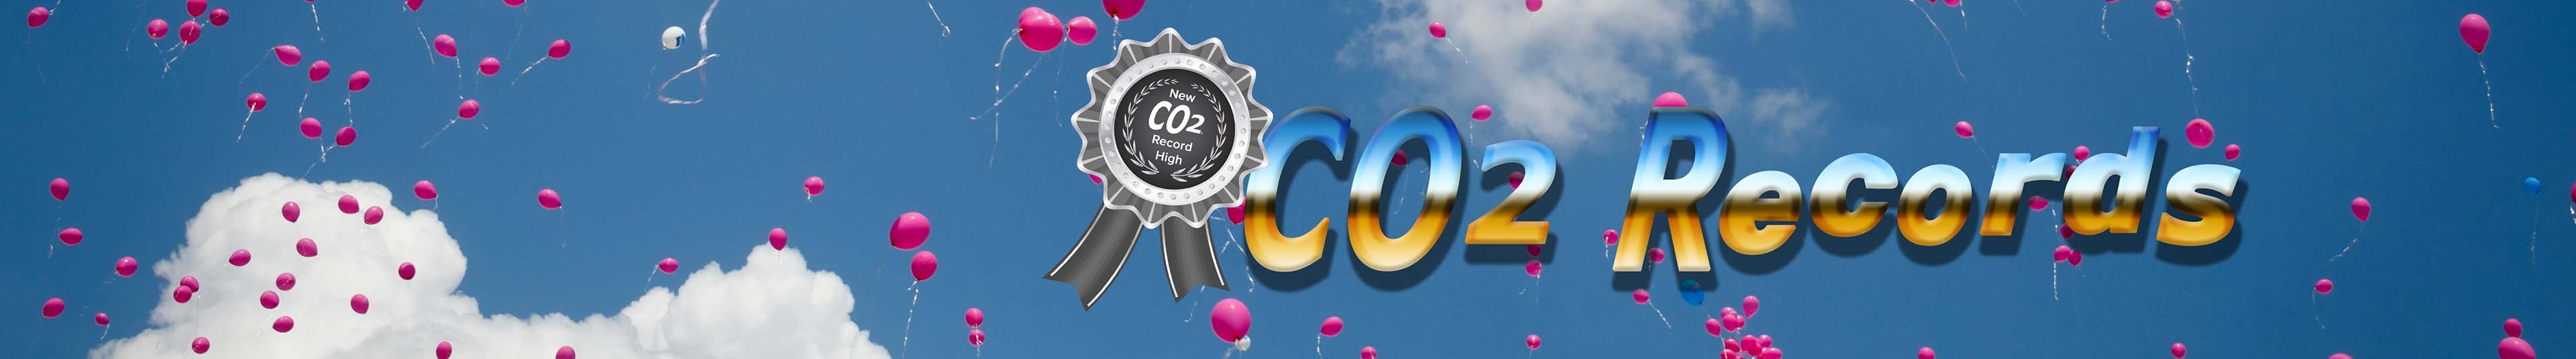 co2 aarde co2 records banner